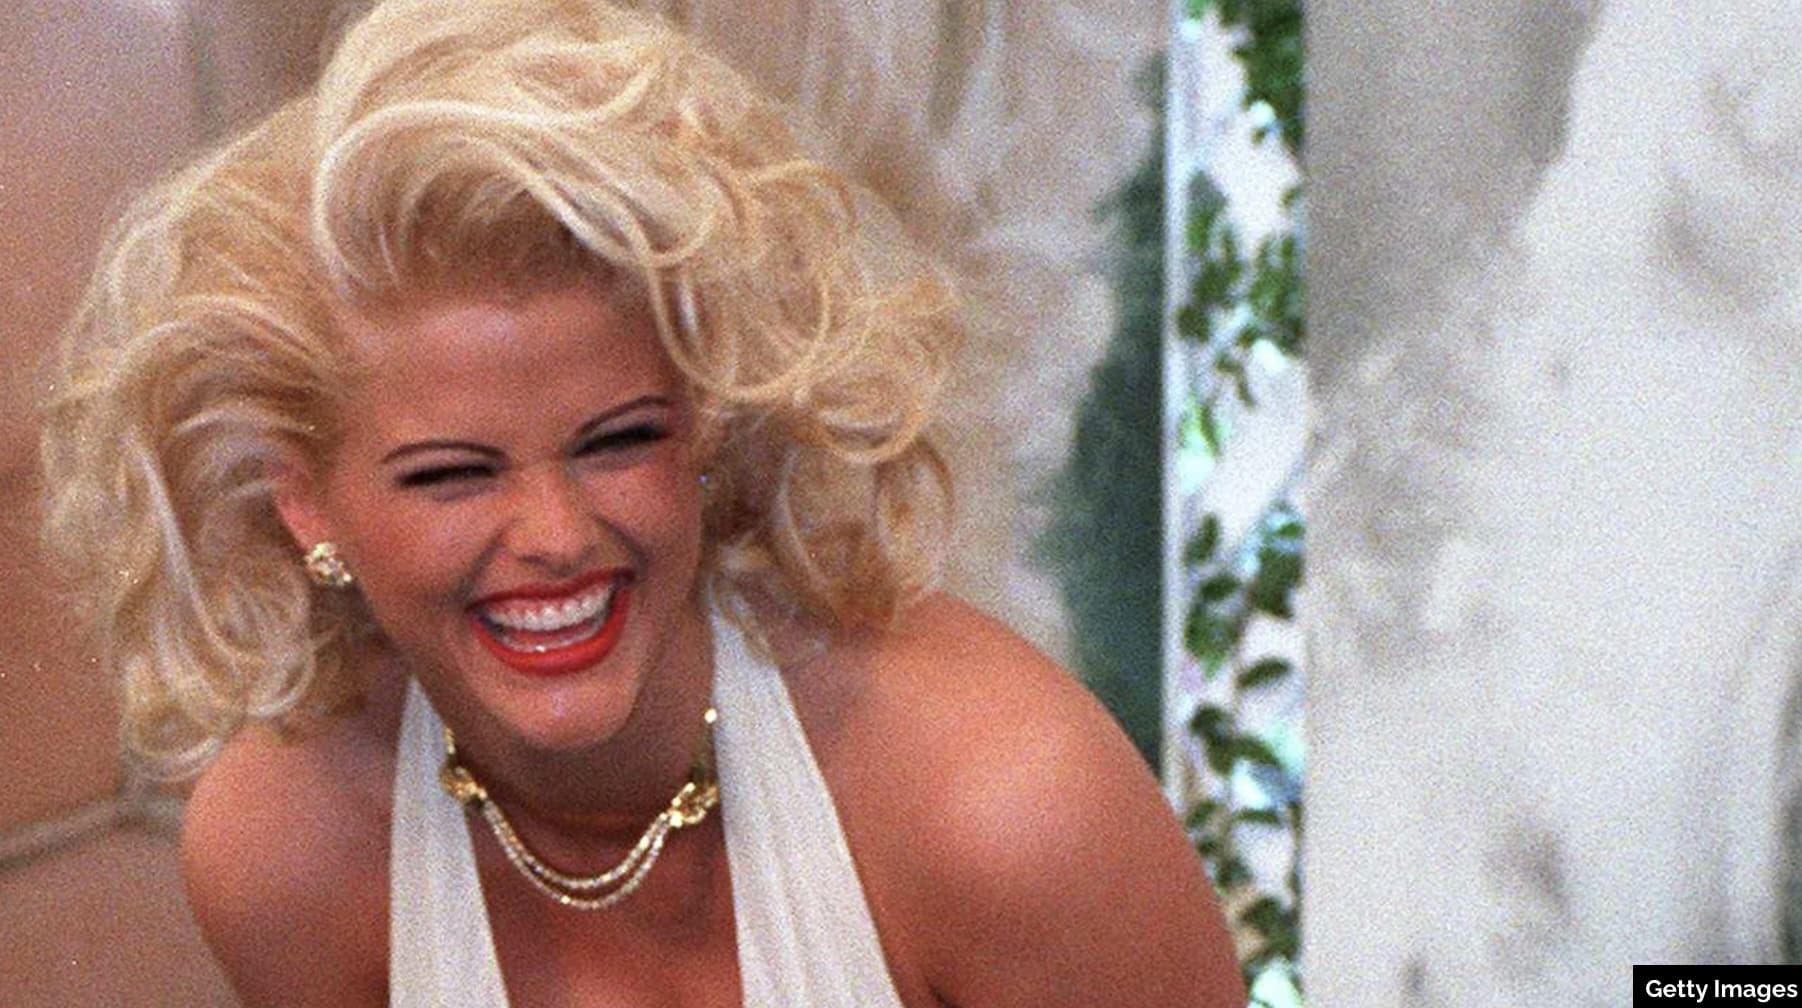 Your mail on legal proceedings in The Bahamas related to Anna Nicole